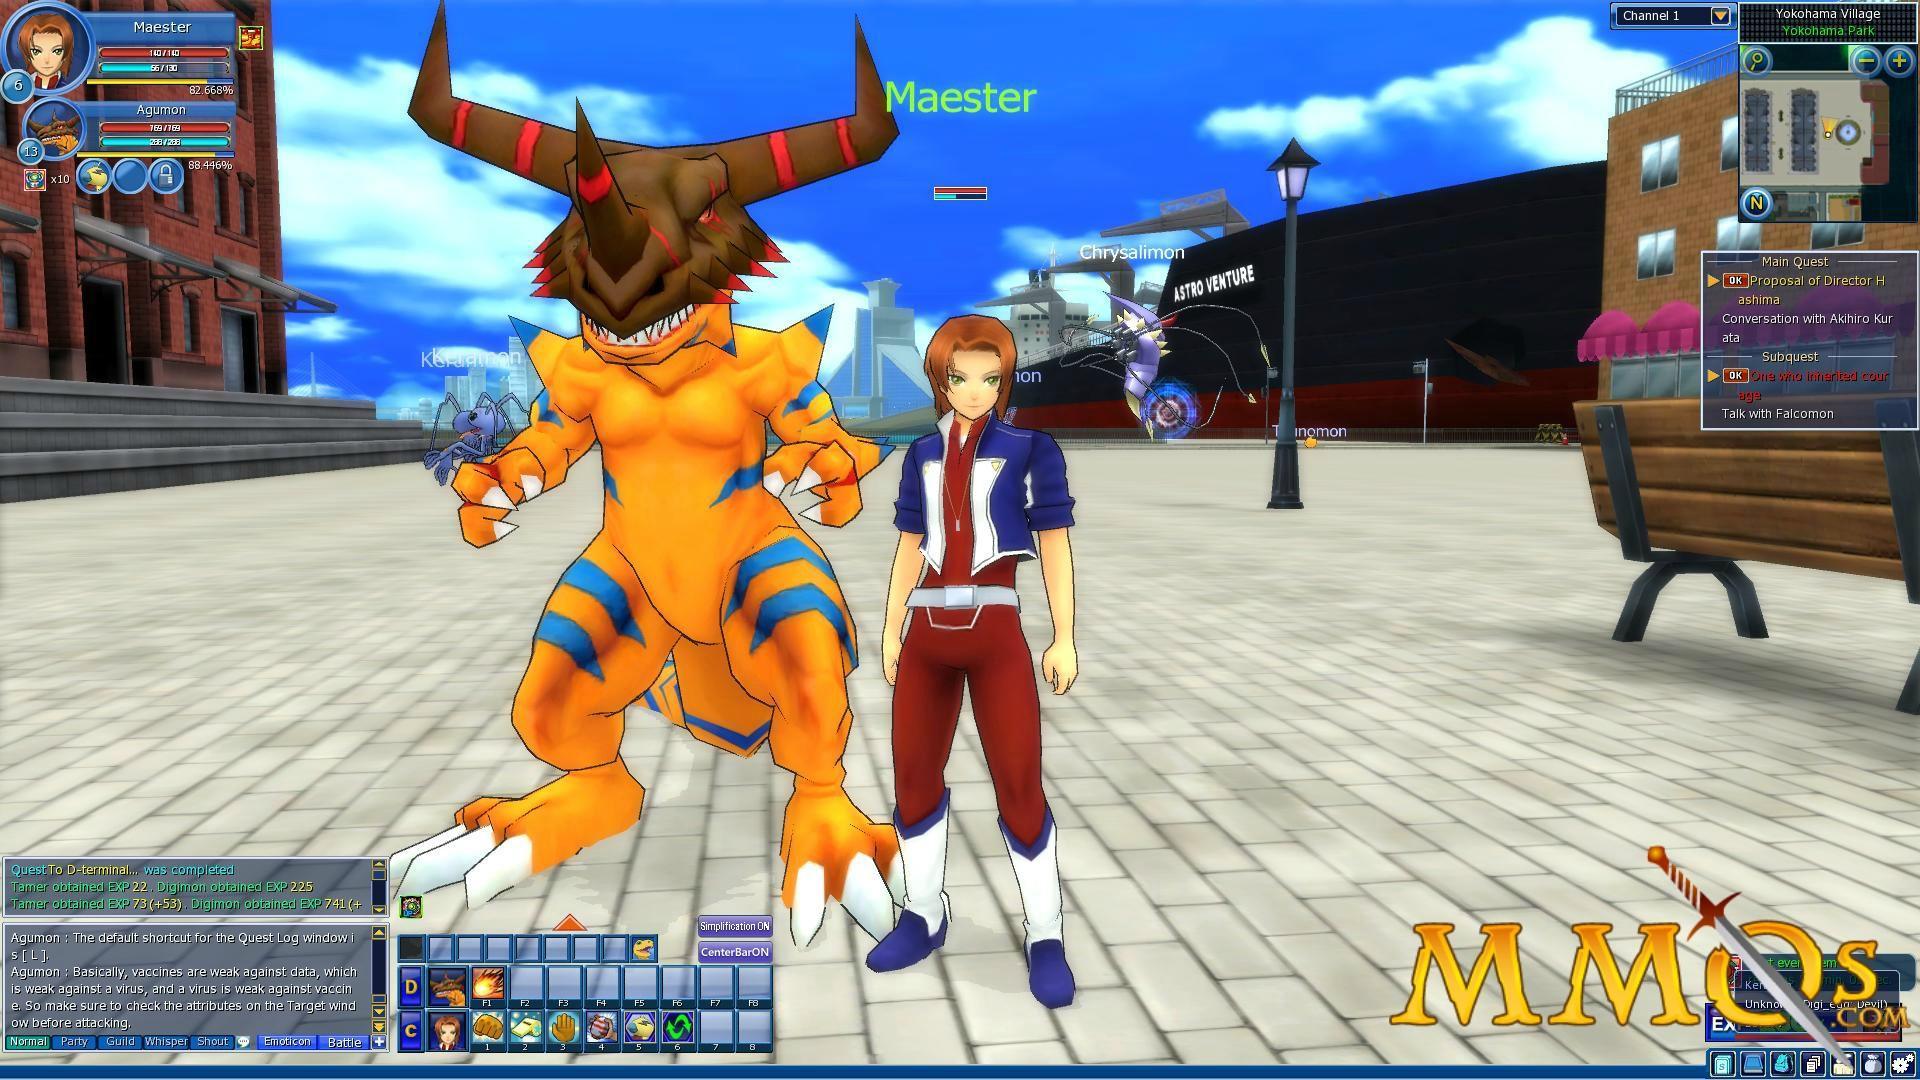 Digimon Masters Online just showed the first images of its remake